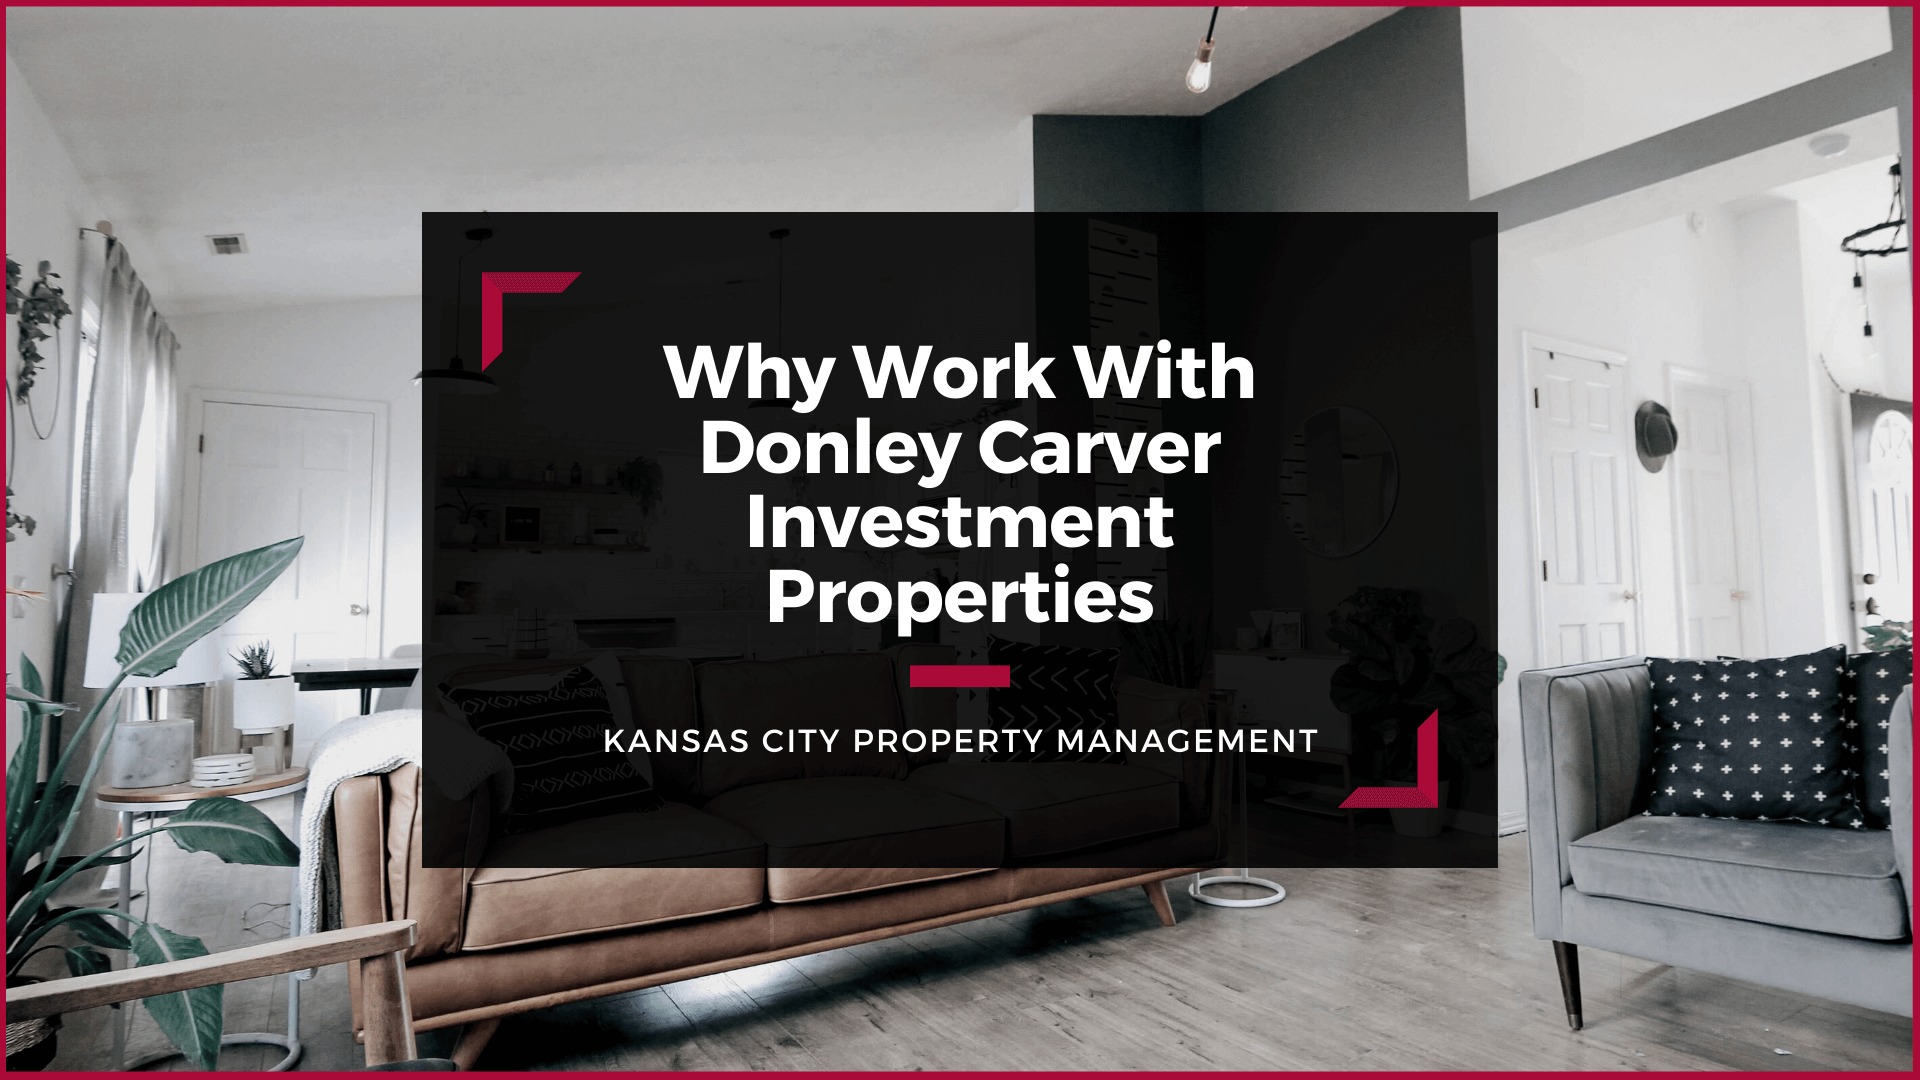 Why Kansas City Single-Family Homeowners Should Work With Donley Carver Investment Properties